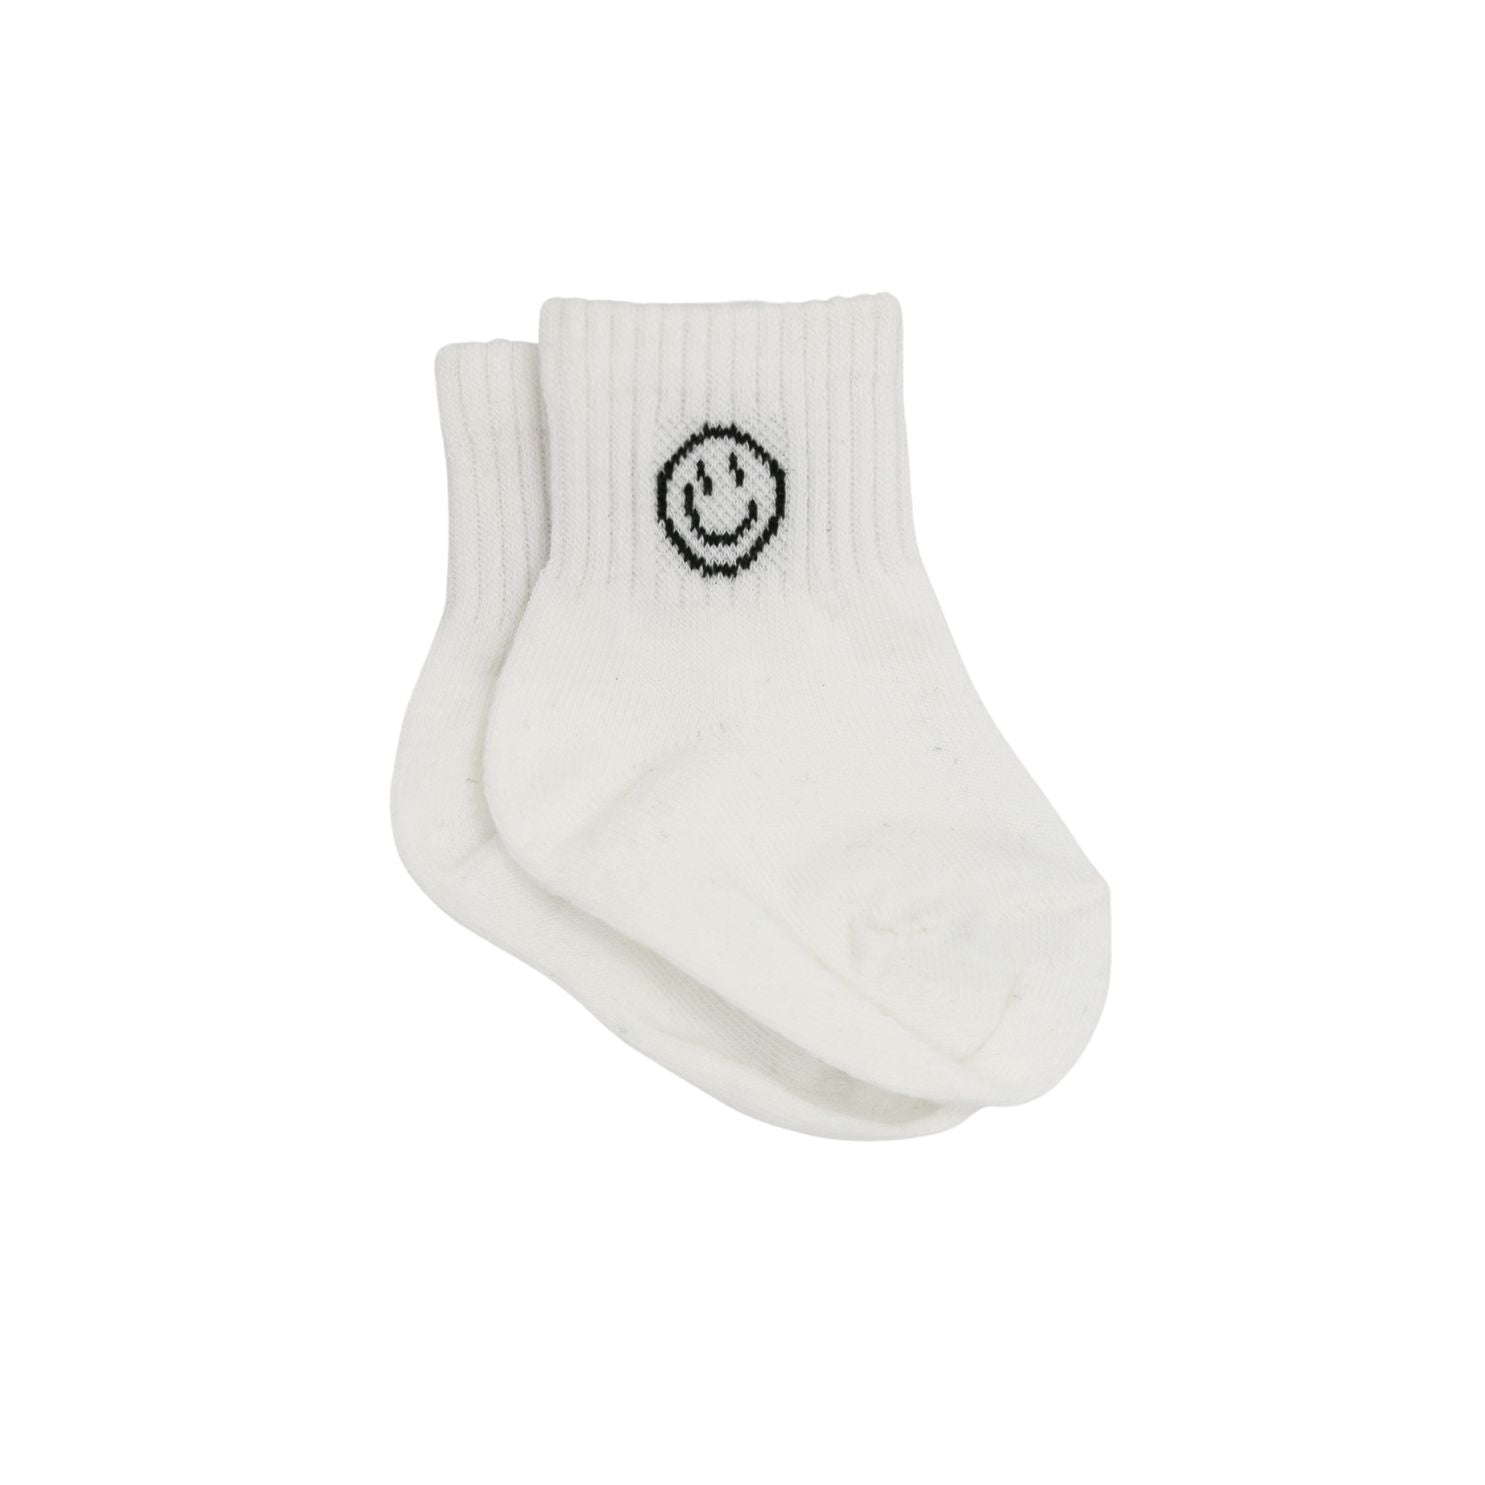 The Baby Cubby Smiling Face Socks - White